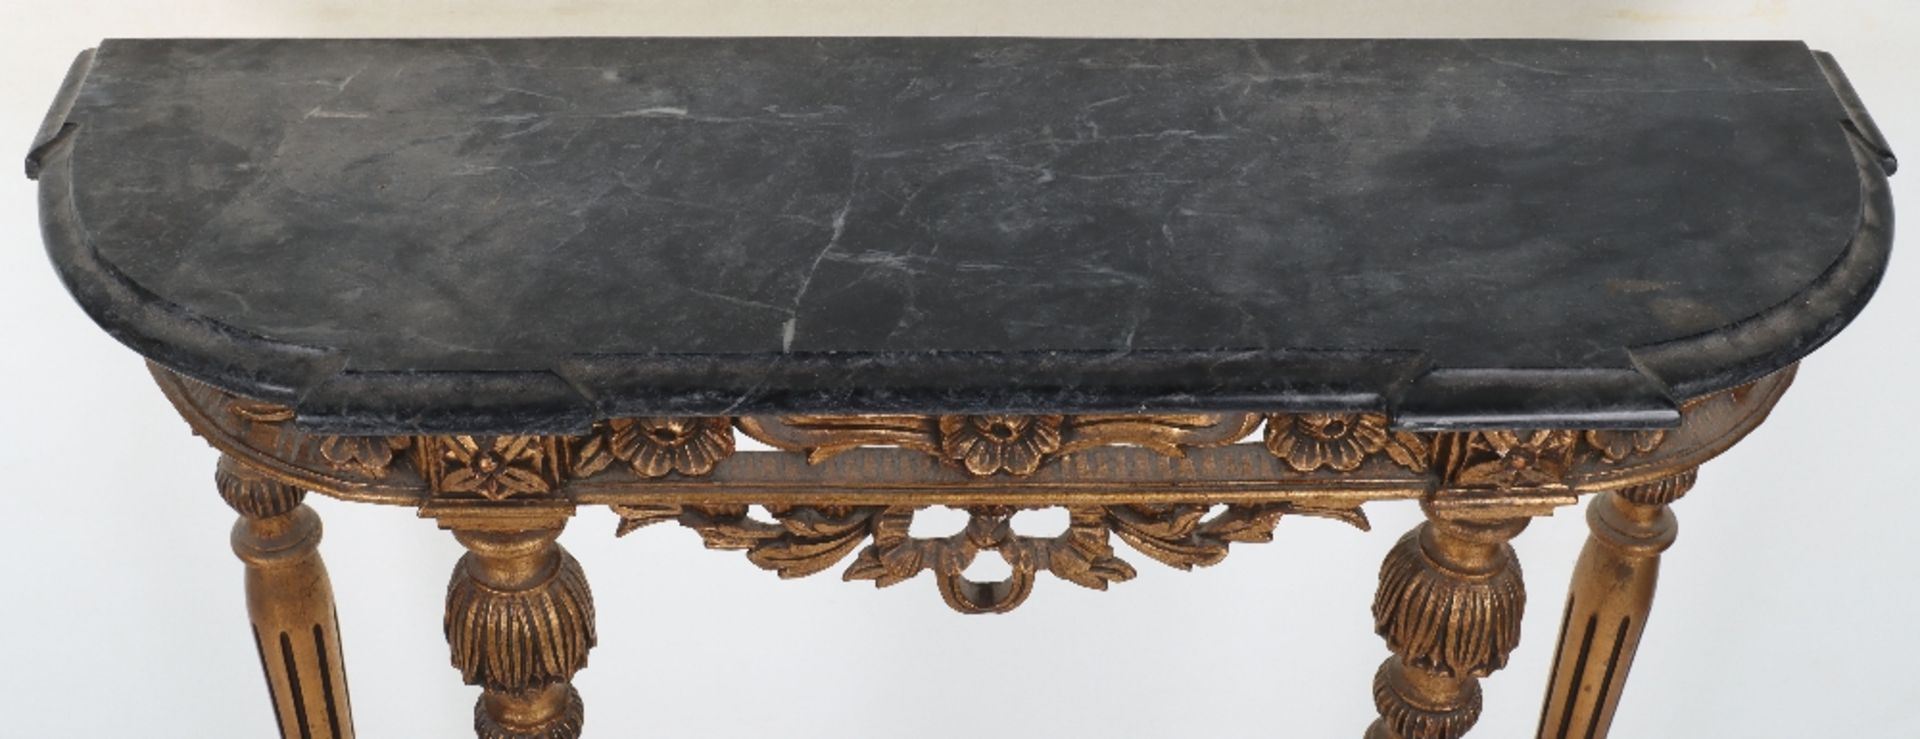 A French giltwood and marble top console table - Image 4 of 7